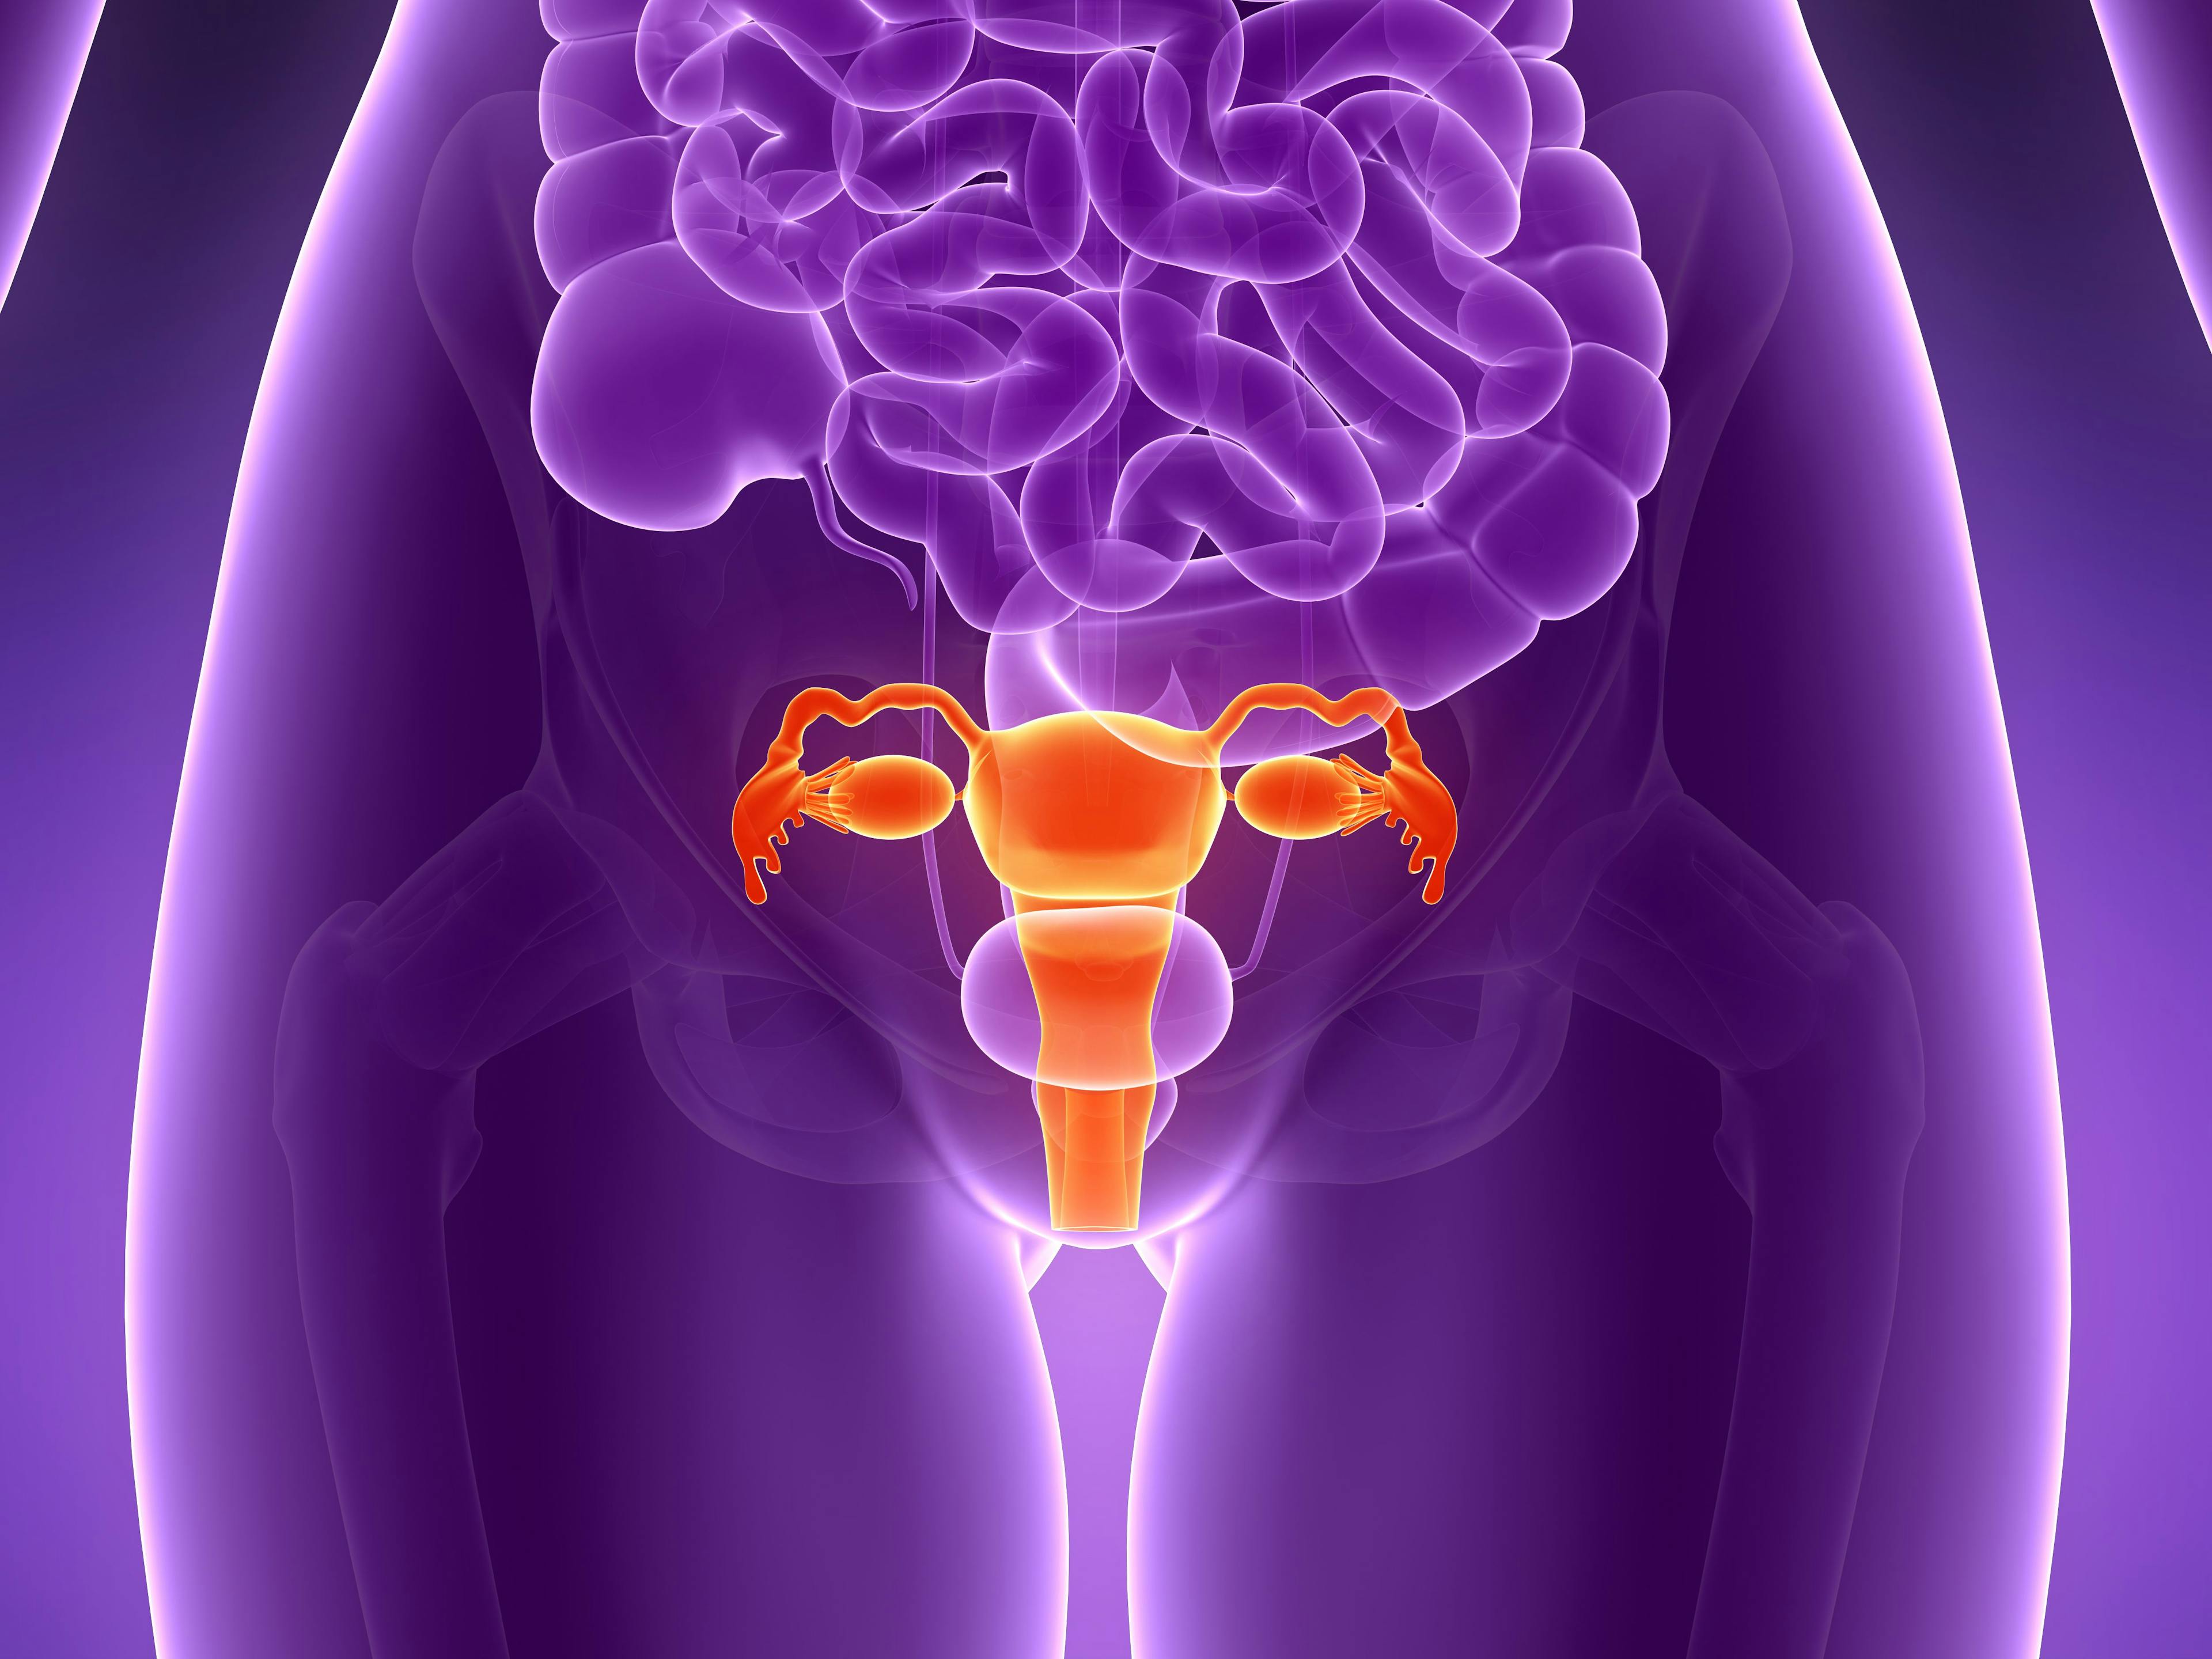 FDA Grants Priority Review to Tisotumab Vedotin for Recurrent/Metastatic Cervical Cancer